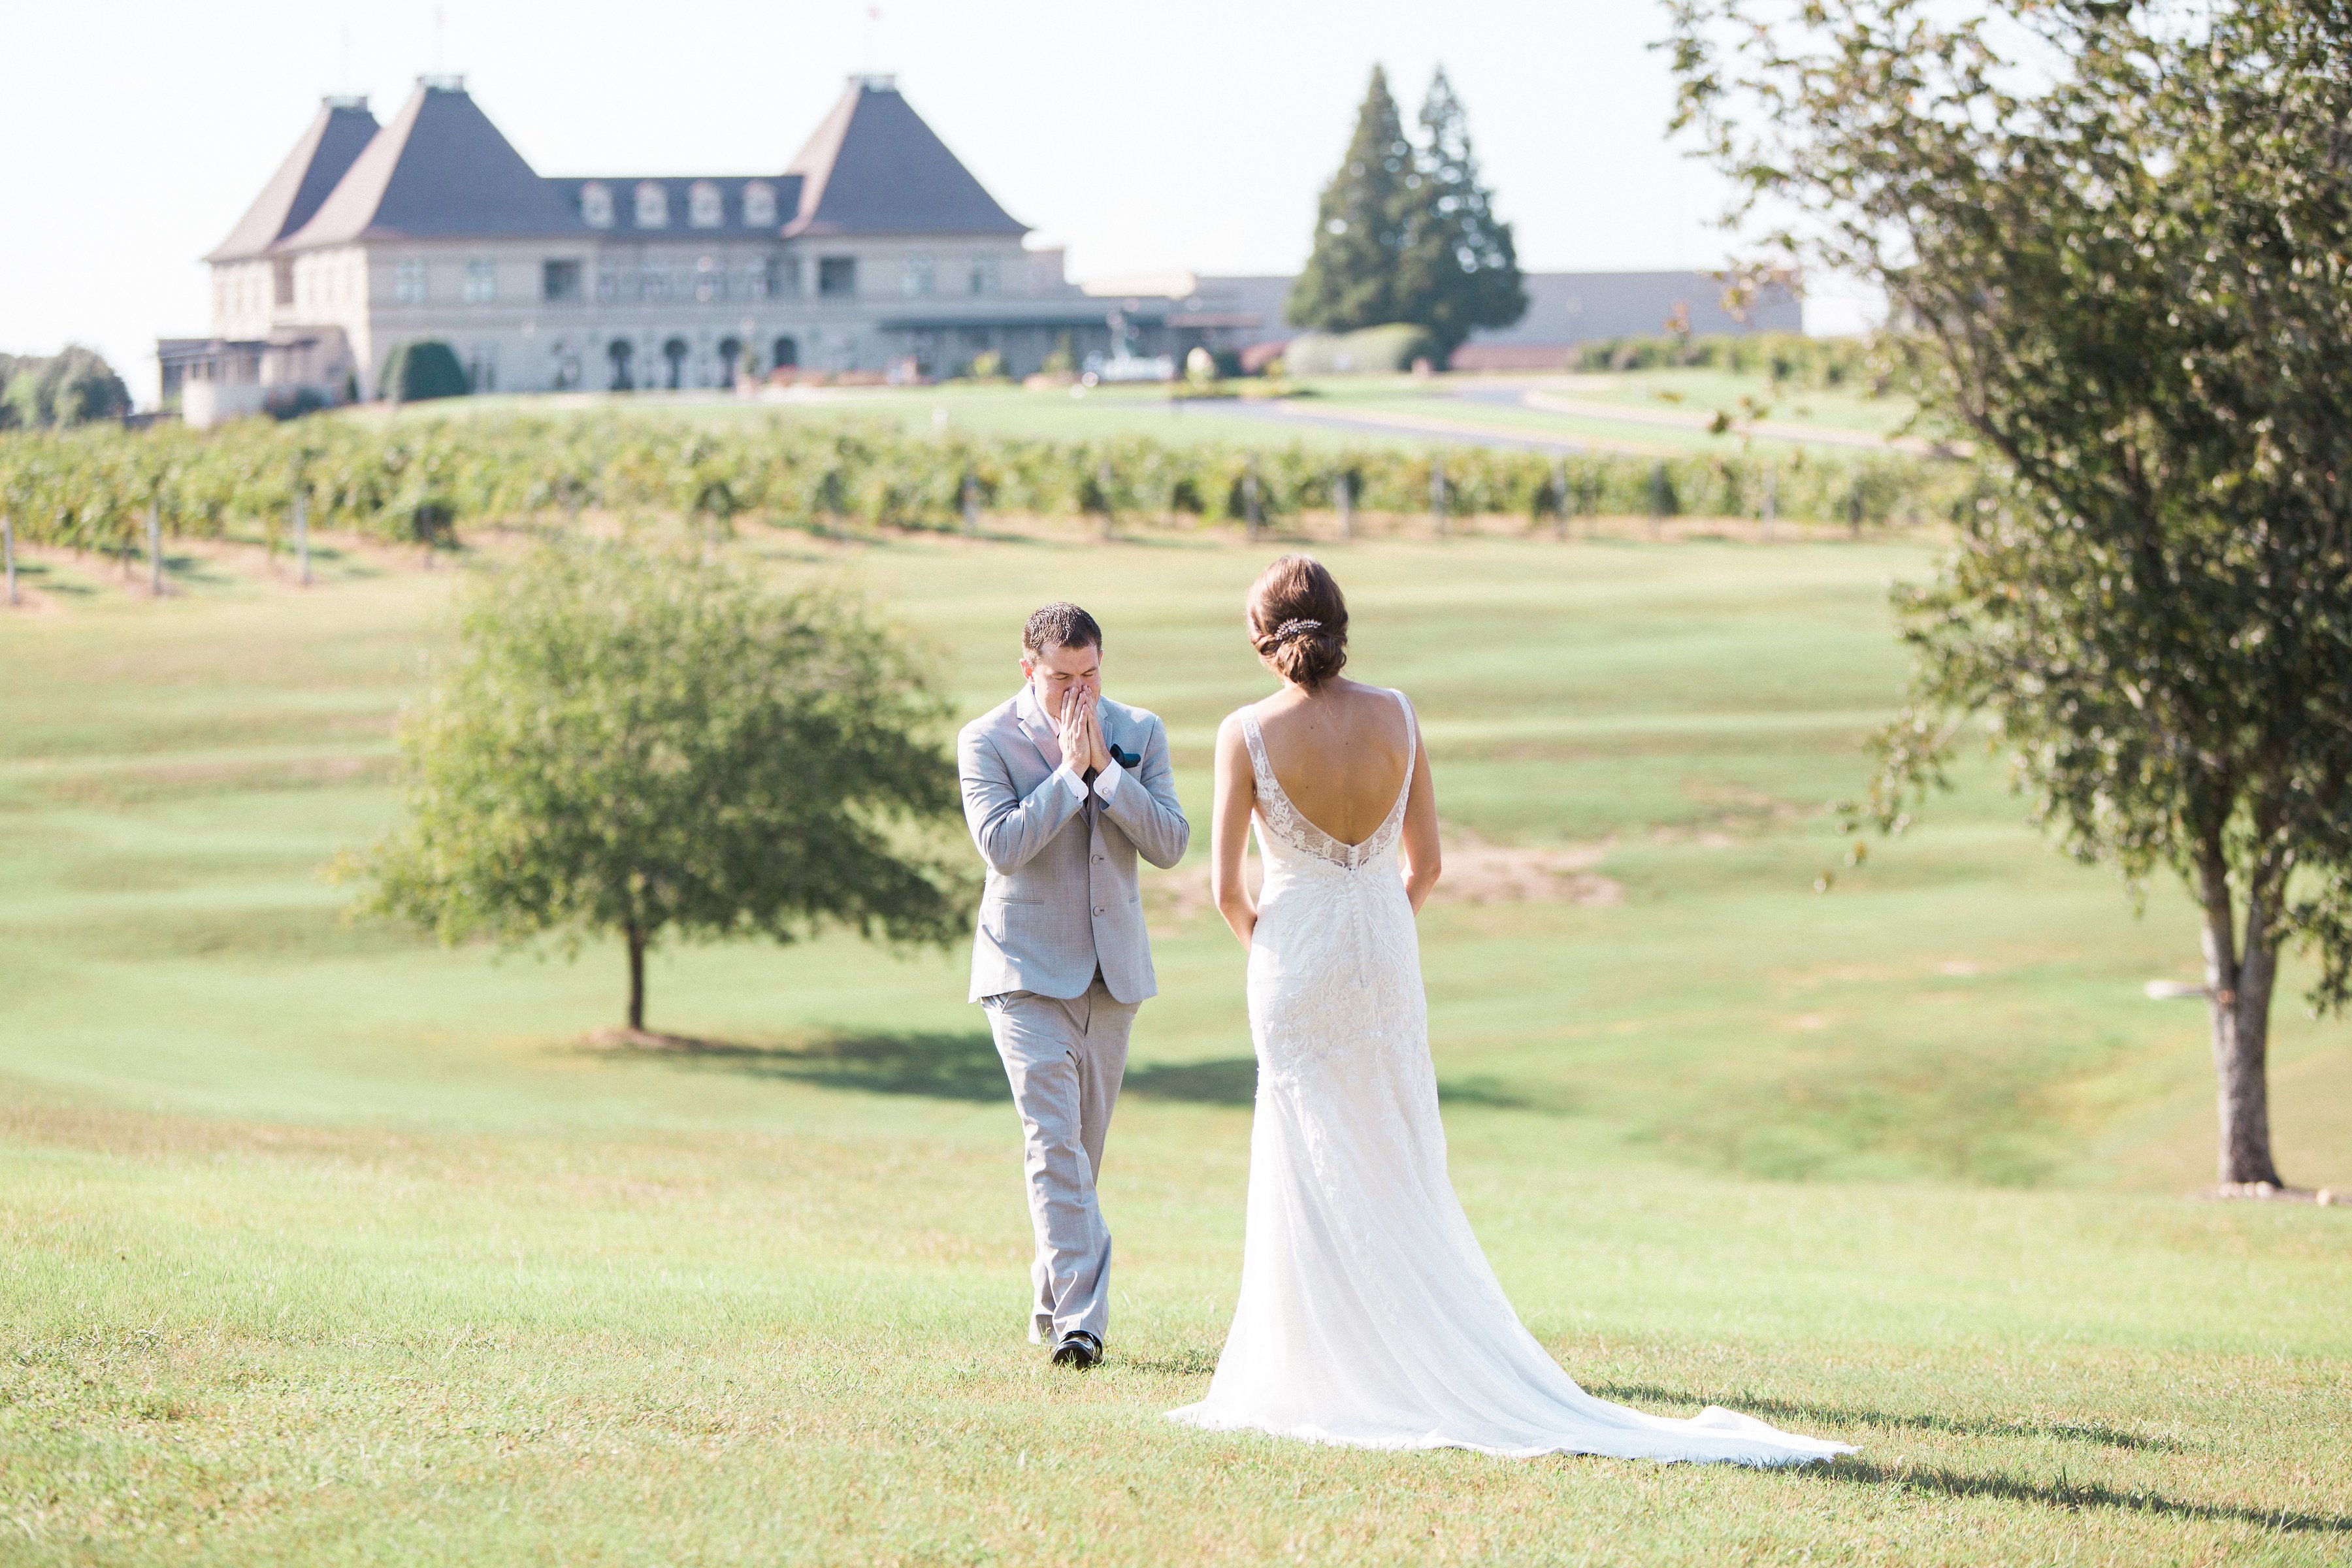 First Look at Chateau Elan Winery Resort by Leigh Wolfe Photography